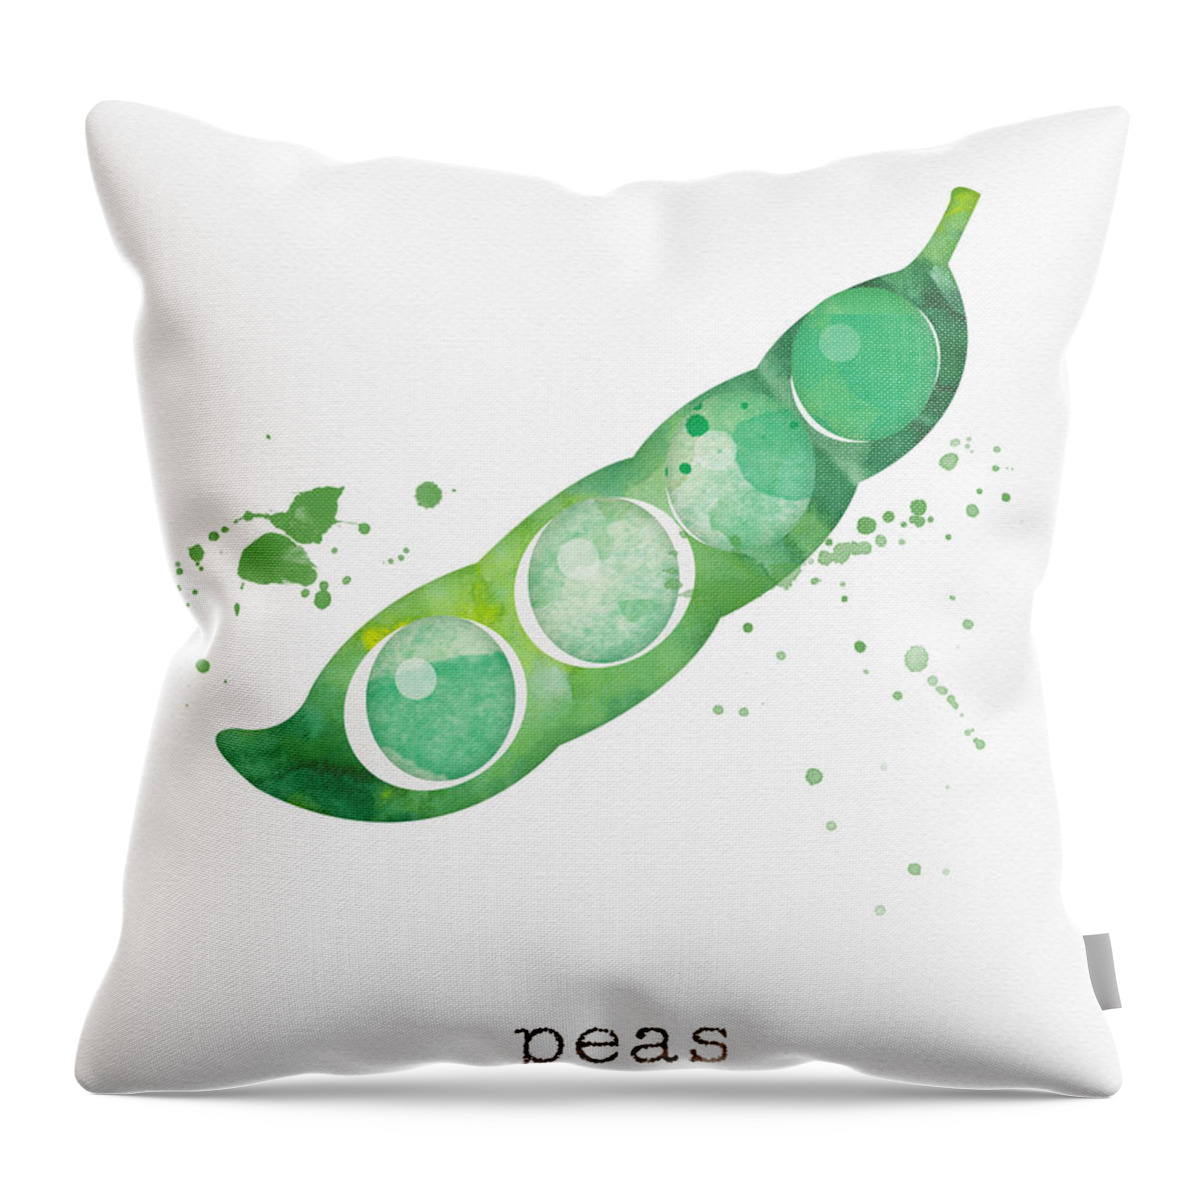 Peas Throw Pillow featuring the painting Fresh Peas by Linda Woods